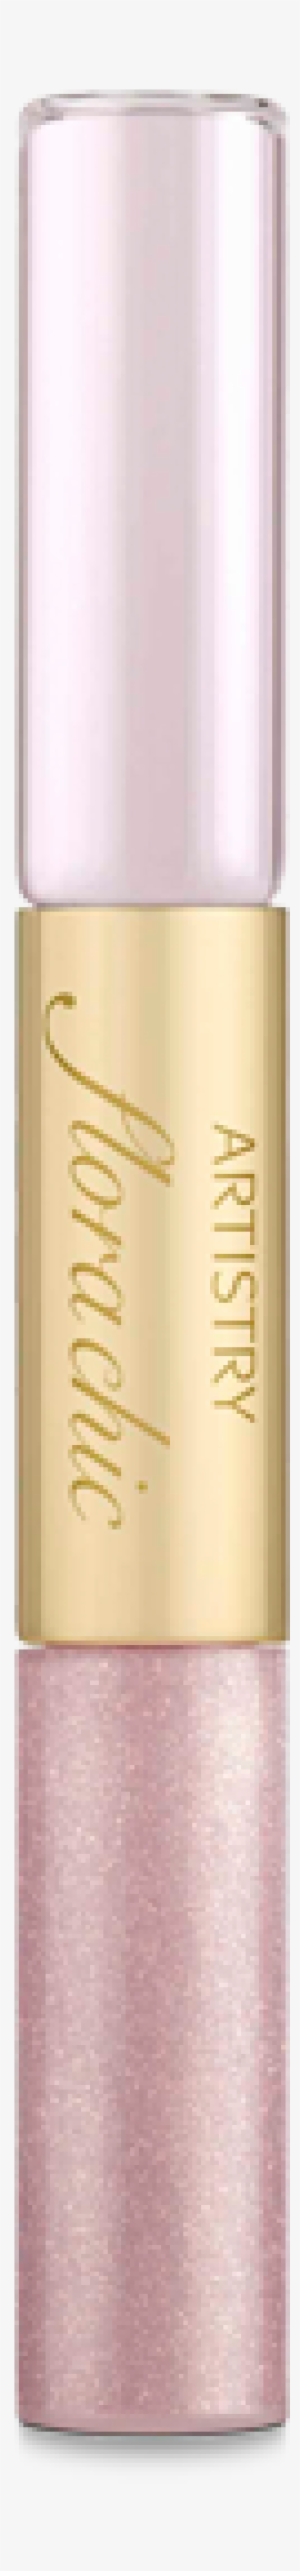 Artistry Flora Chic™ Rollerball And Lip Gloss Duo - Artistry